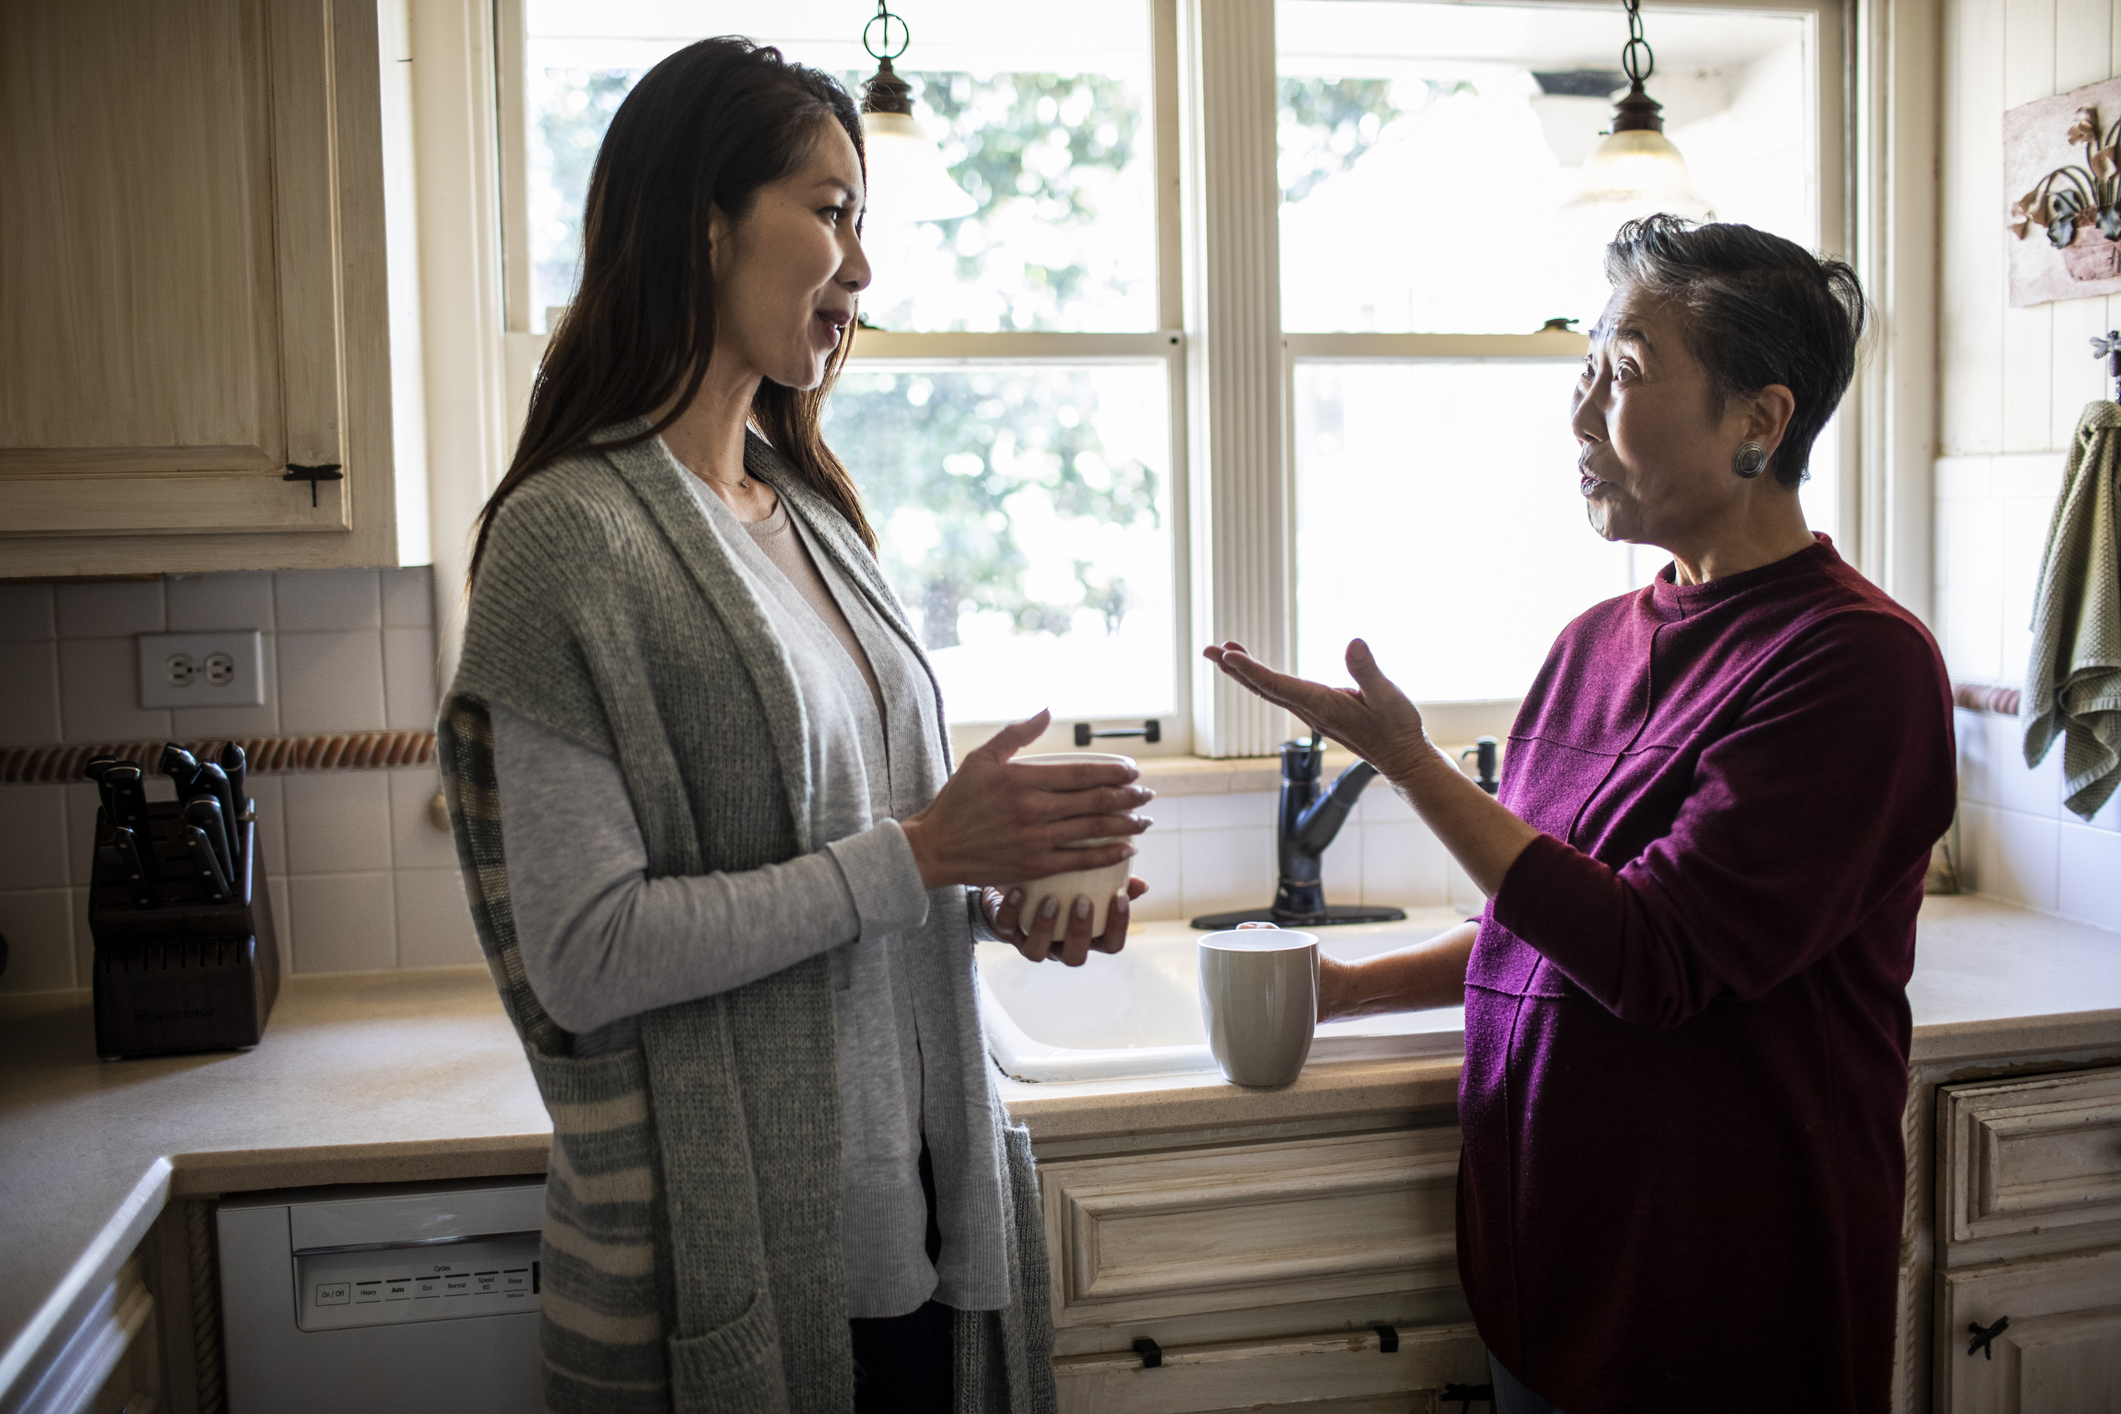 An older woman is speaking with a younger woman in a kitchen